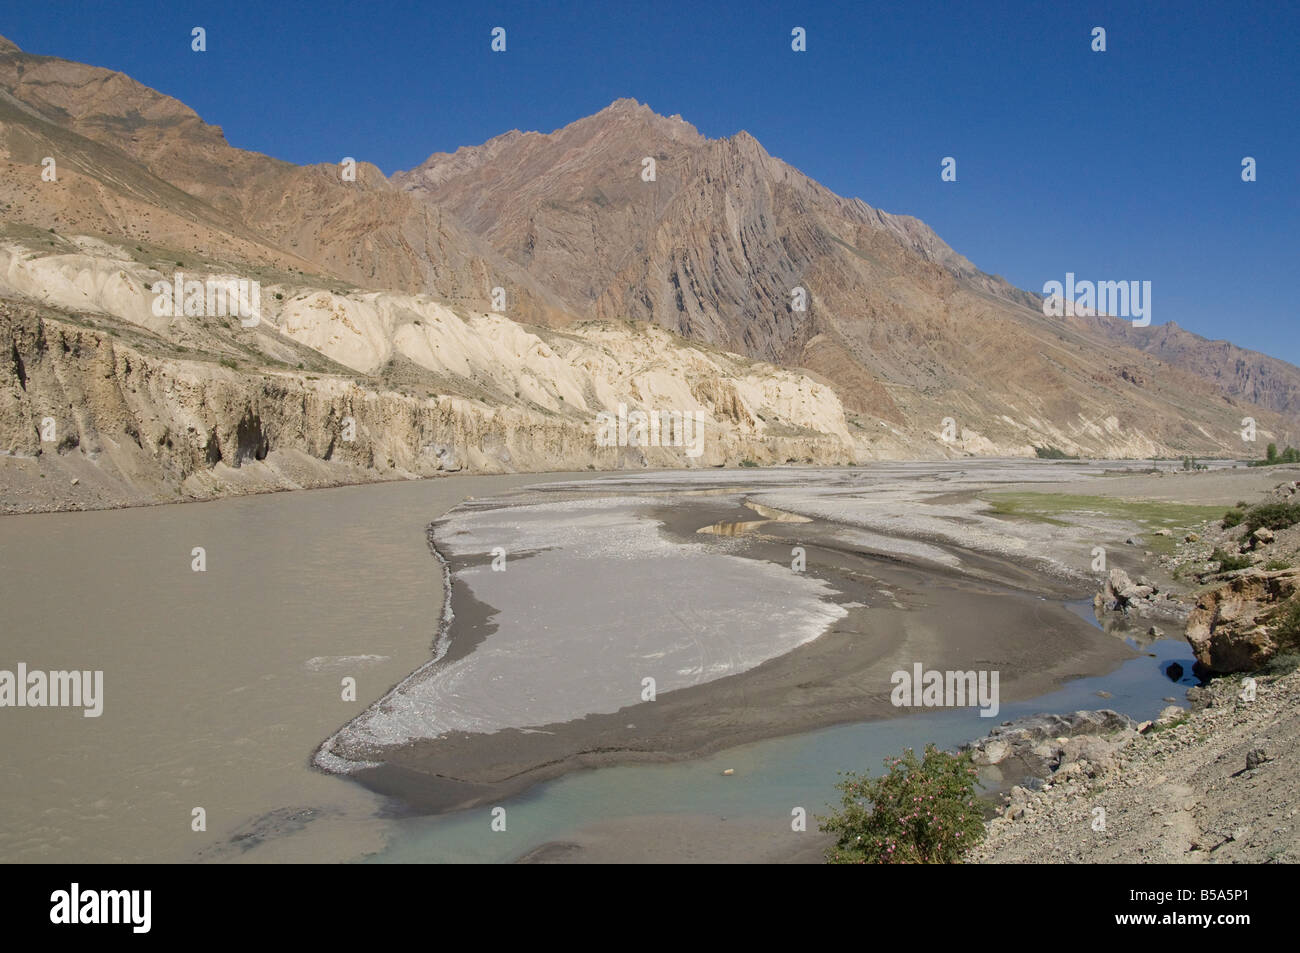 Waters from snow melting and mountains in background, on road between Tabo and Kaza, Spiti River, Spiti, Himachal Pradesh, India Stock Photo